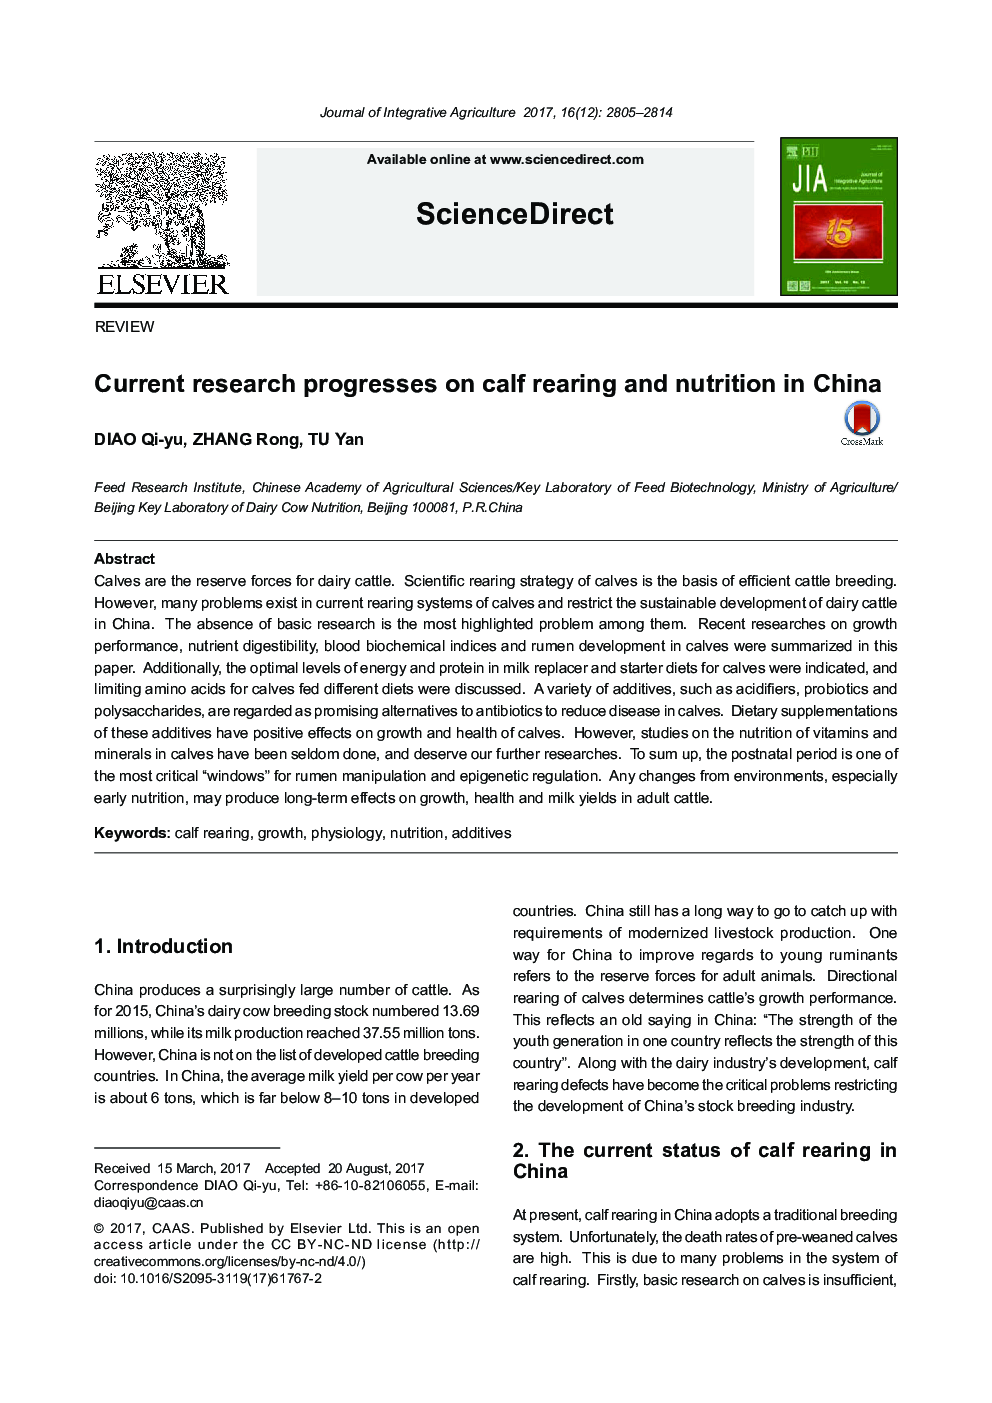 Current research progresses on calf rearing and nutrition in China